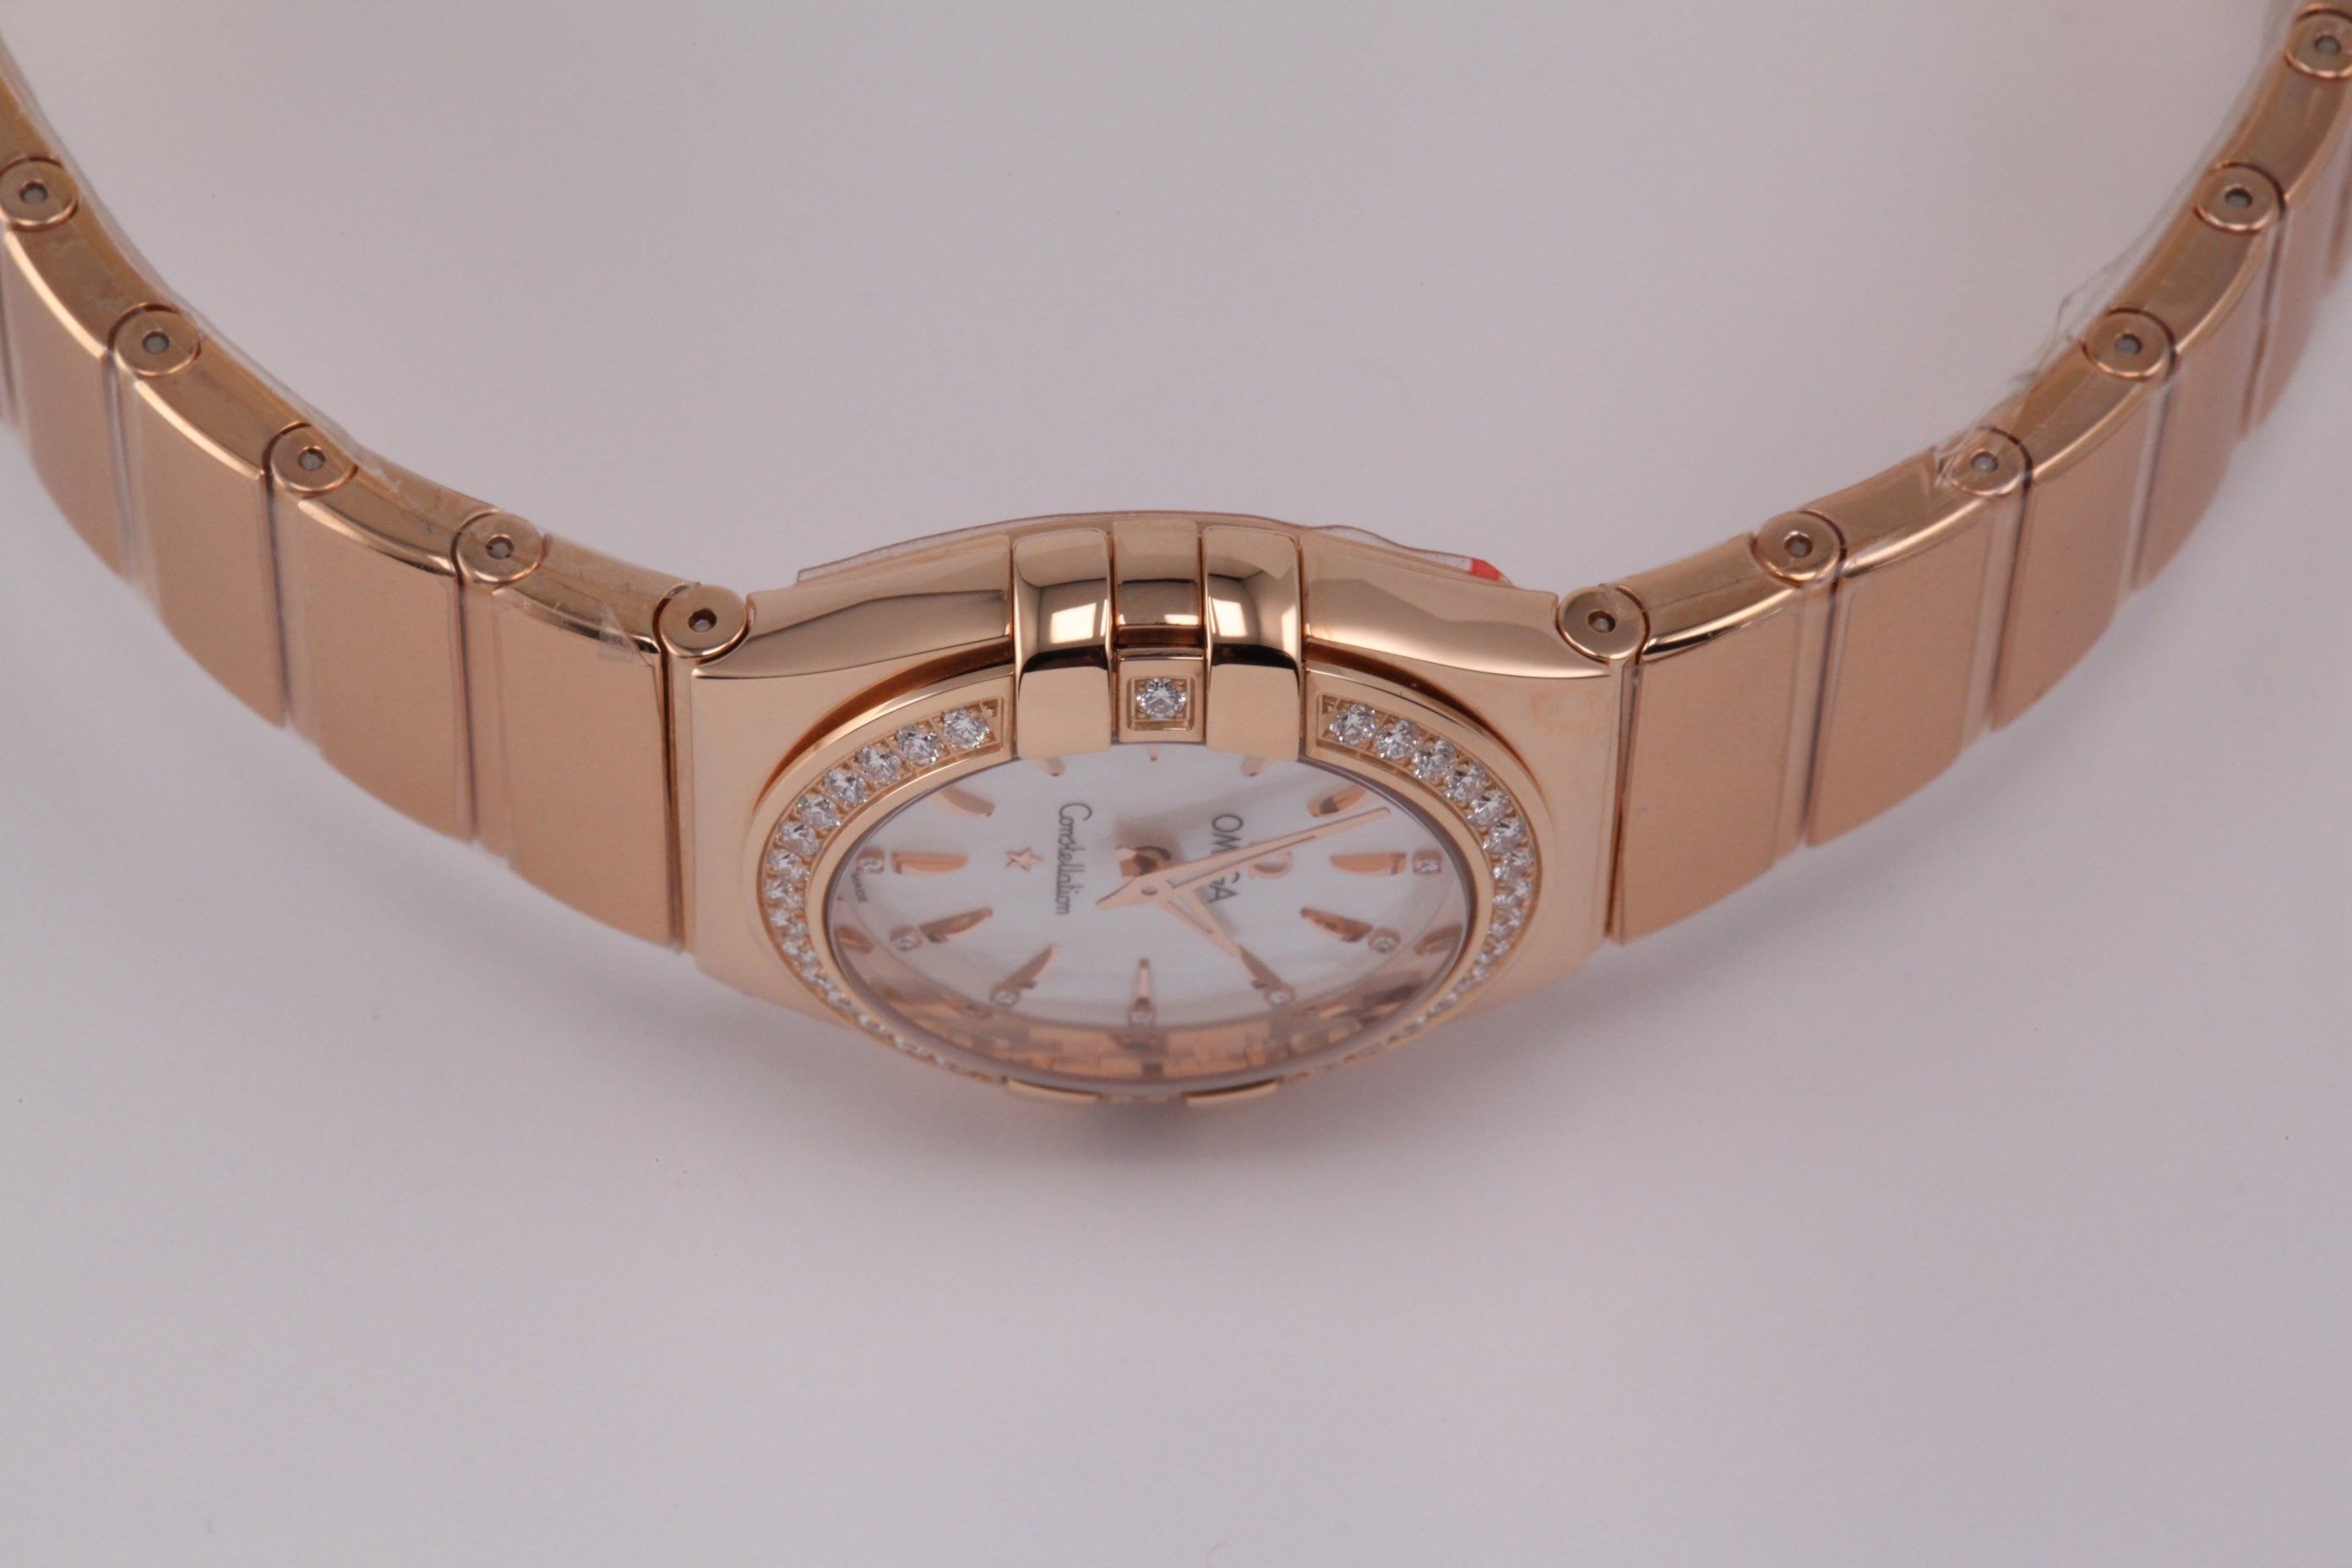 omega rose gold womens watch